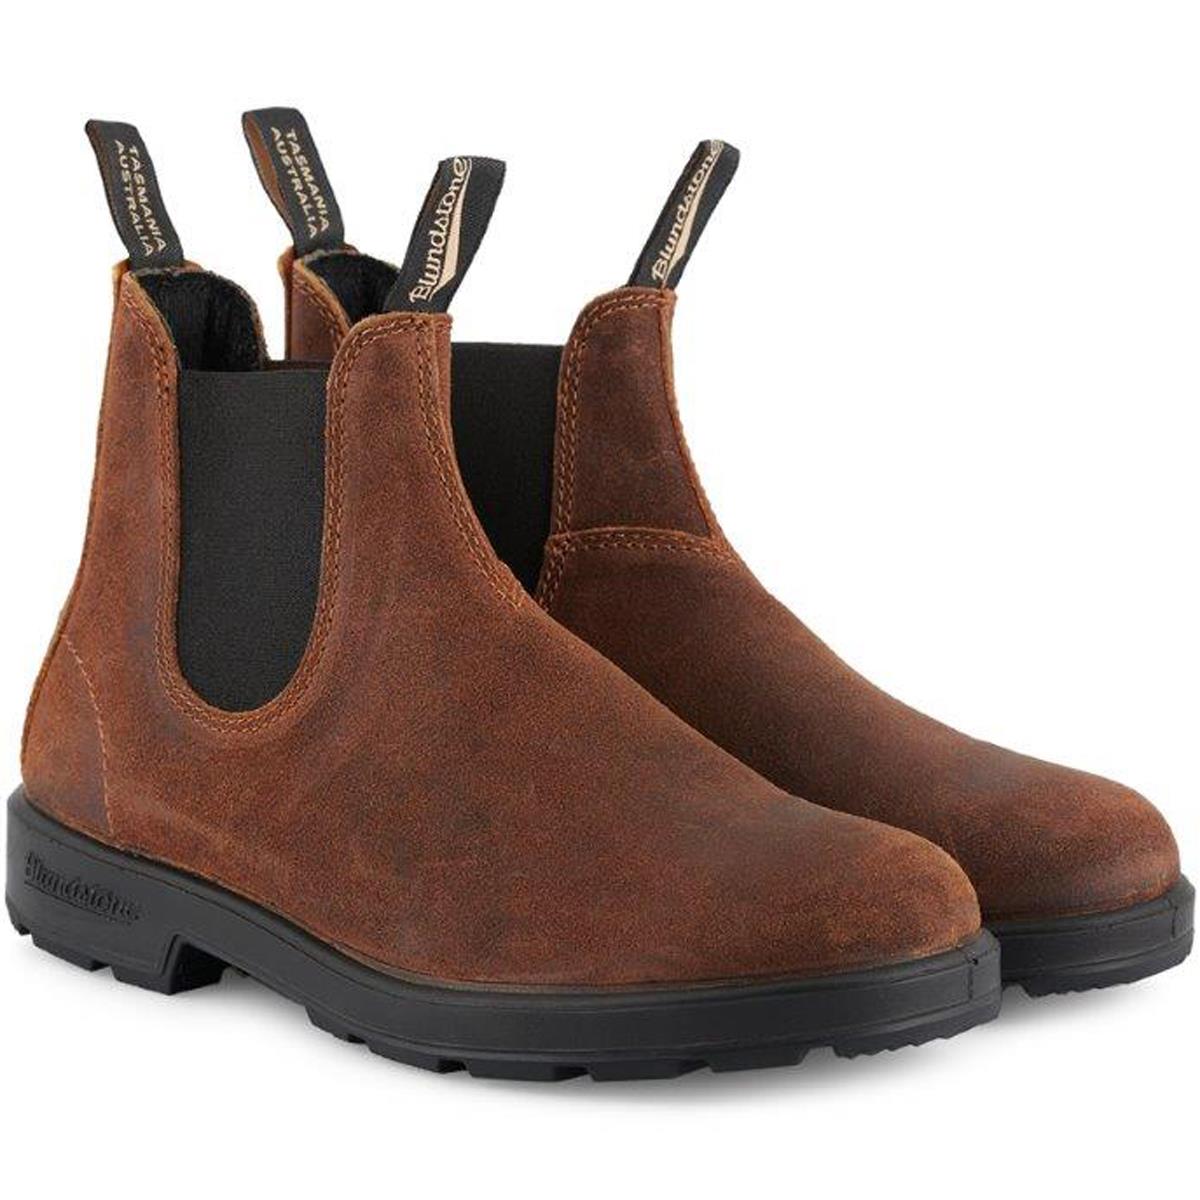 What is the hype about Blundstone boots?